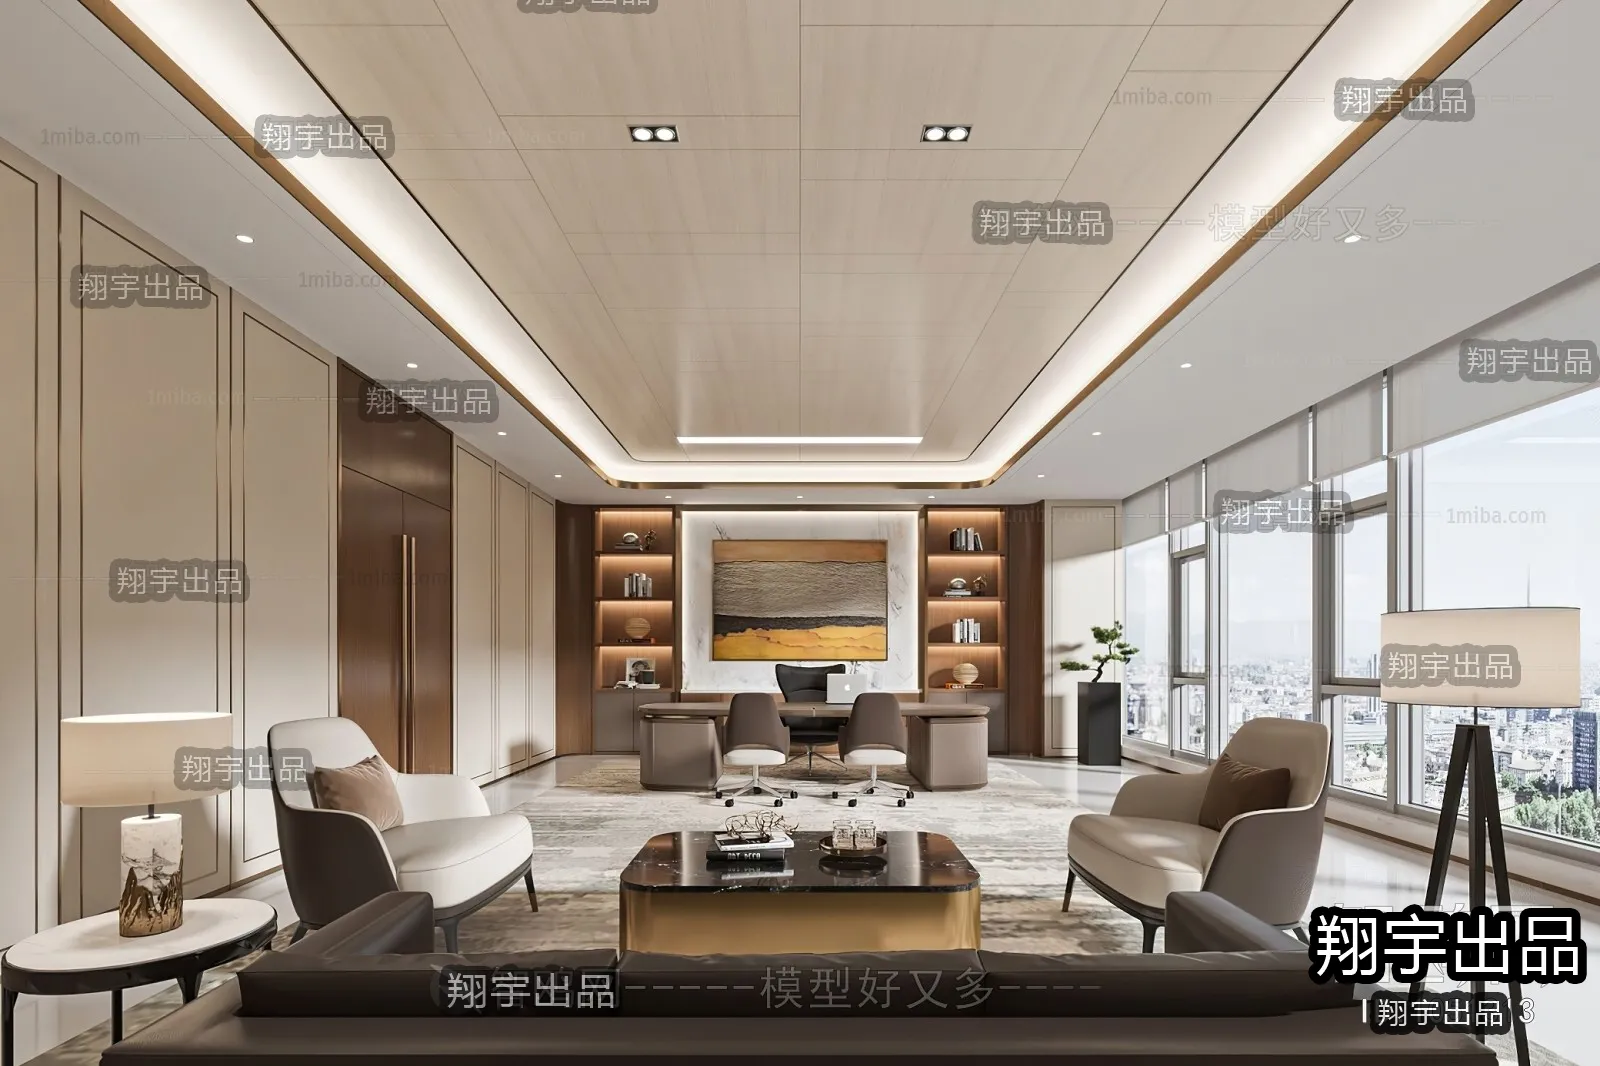 3D OFFICE INTERIOR (VRAY) – MANAGER ROOM 3D SCENES – 098